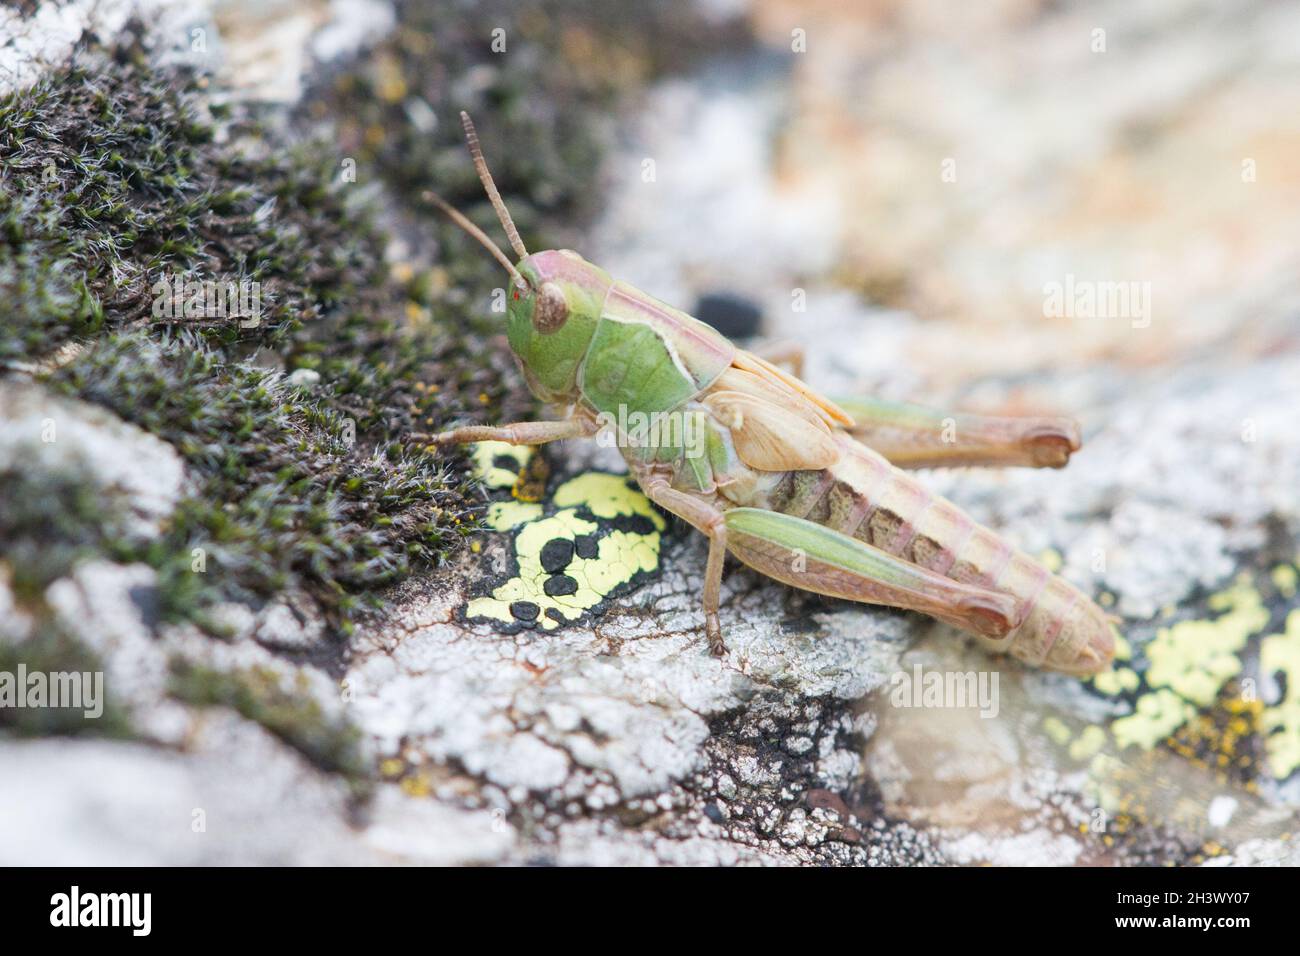 Ursula's Toothed Grasshopper (Stenobothrus ursulae), a female. Endemism of NW-Italian Alps. Mont Avic Natural Park, Aosta, Italy. Stock Photo